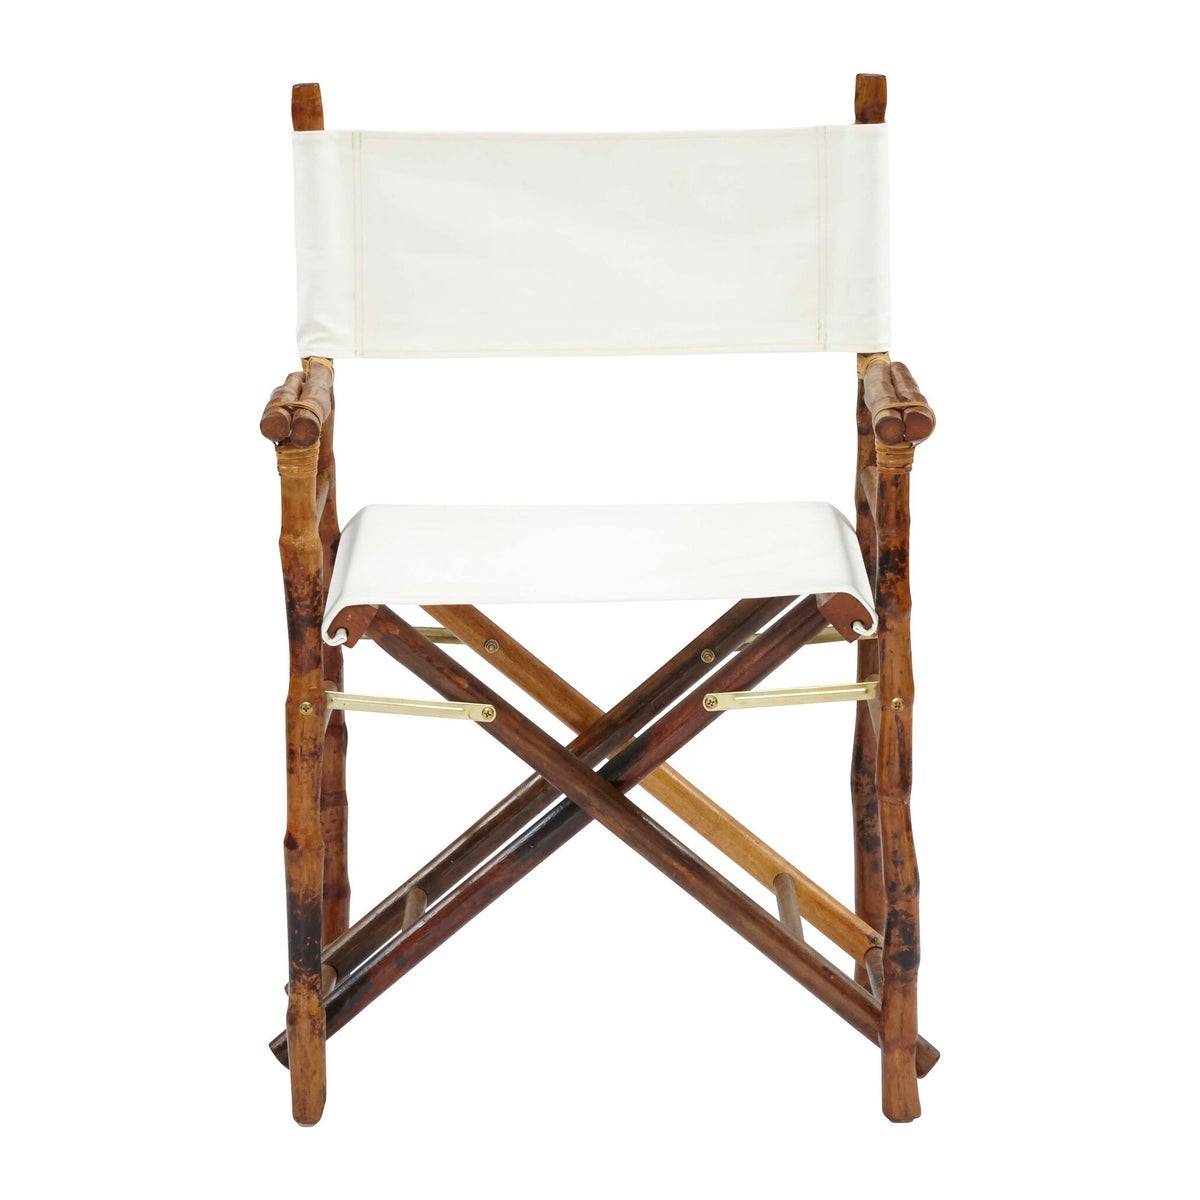 Folding Campaign Directors Chair Frame Color - Tortoise Matte  Seat and Back Color - White SOLD